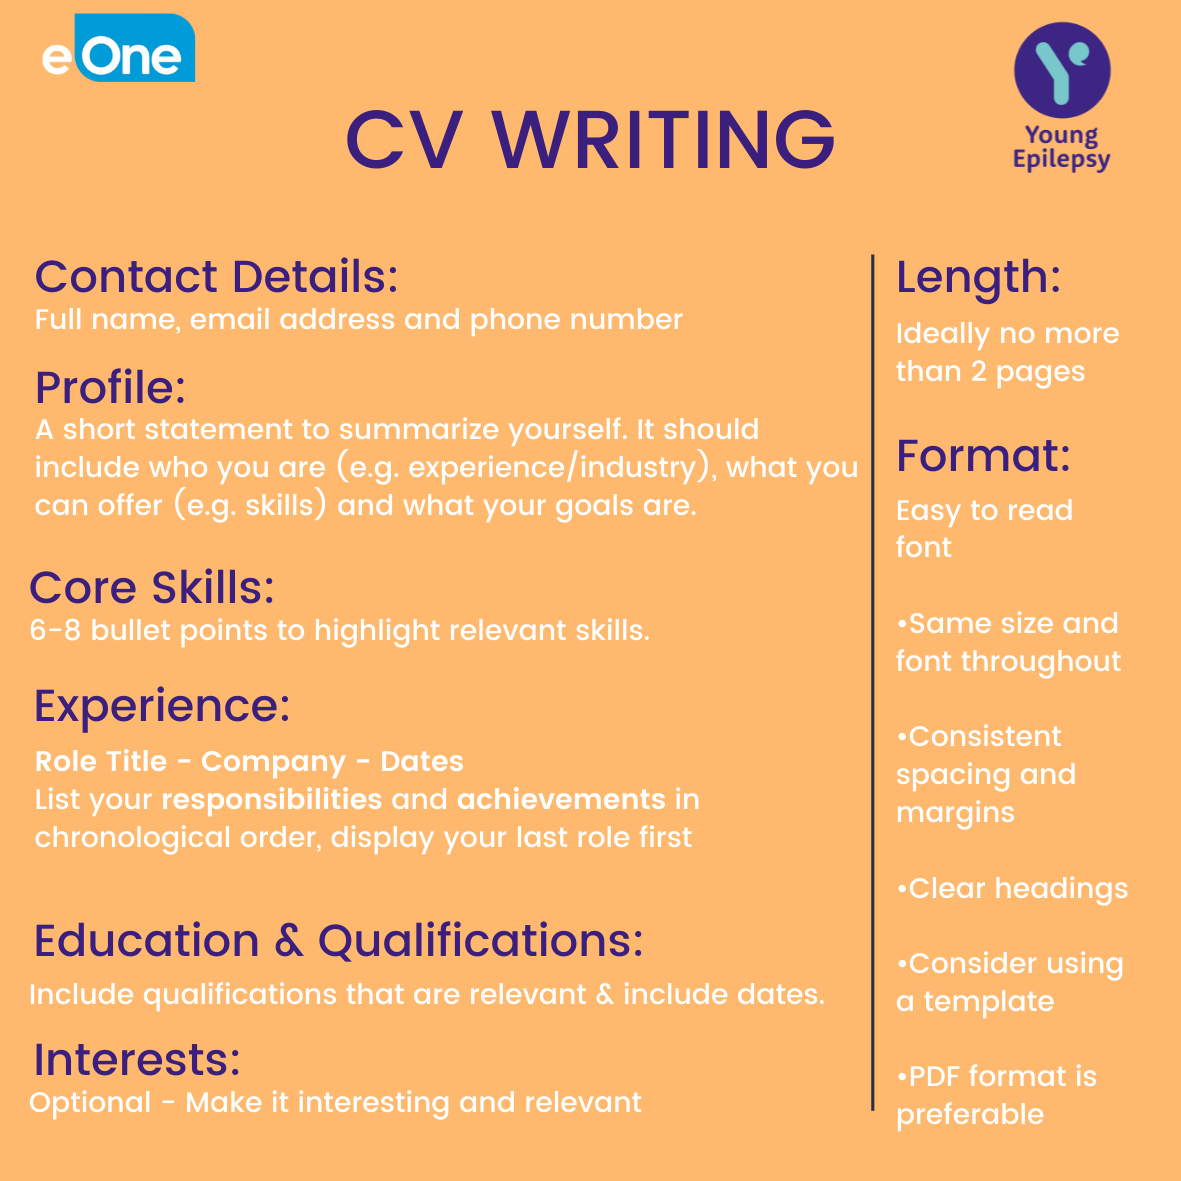 Your cv. What to write about me in CV. Apply in writing and ... A current CV to the address below.. What write on CV.